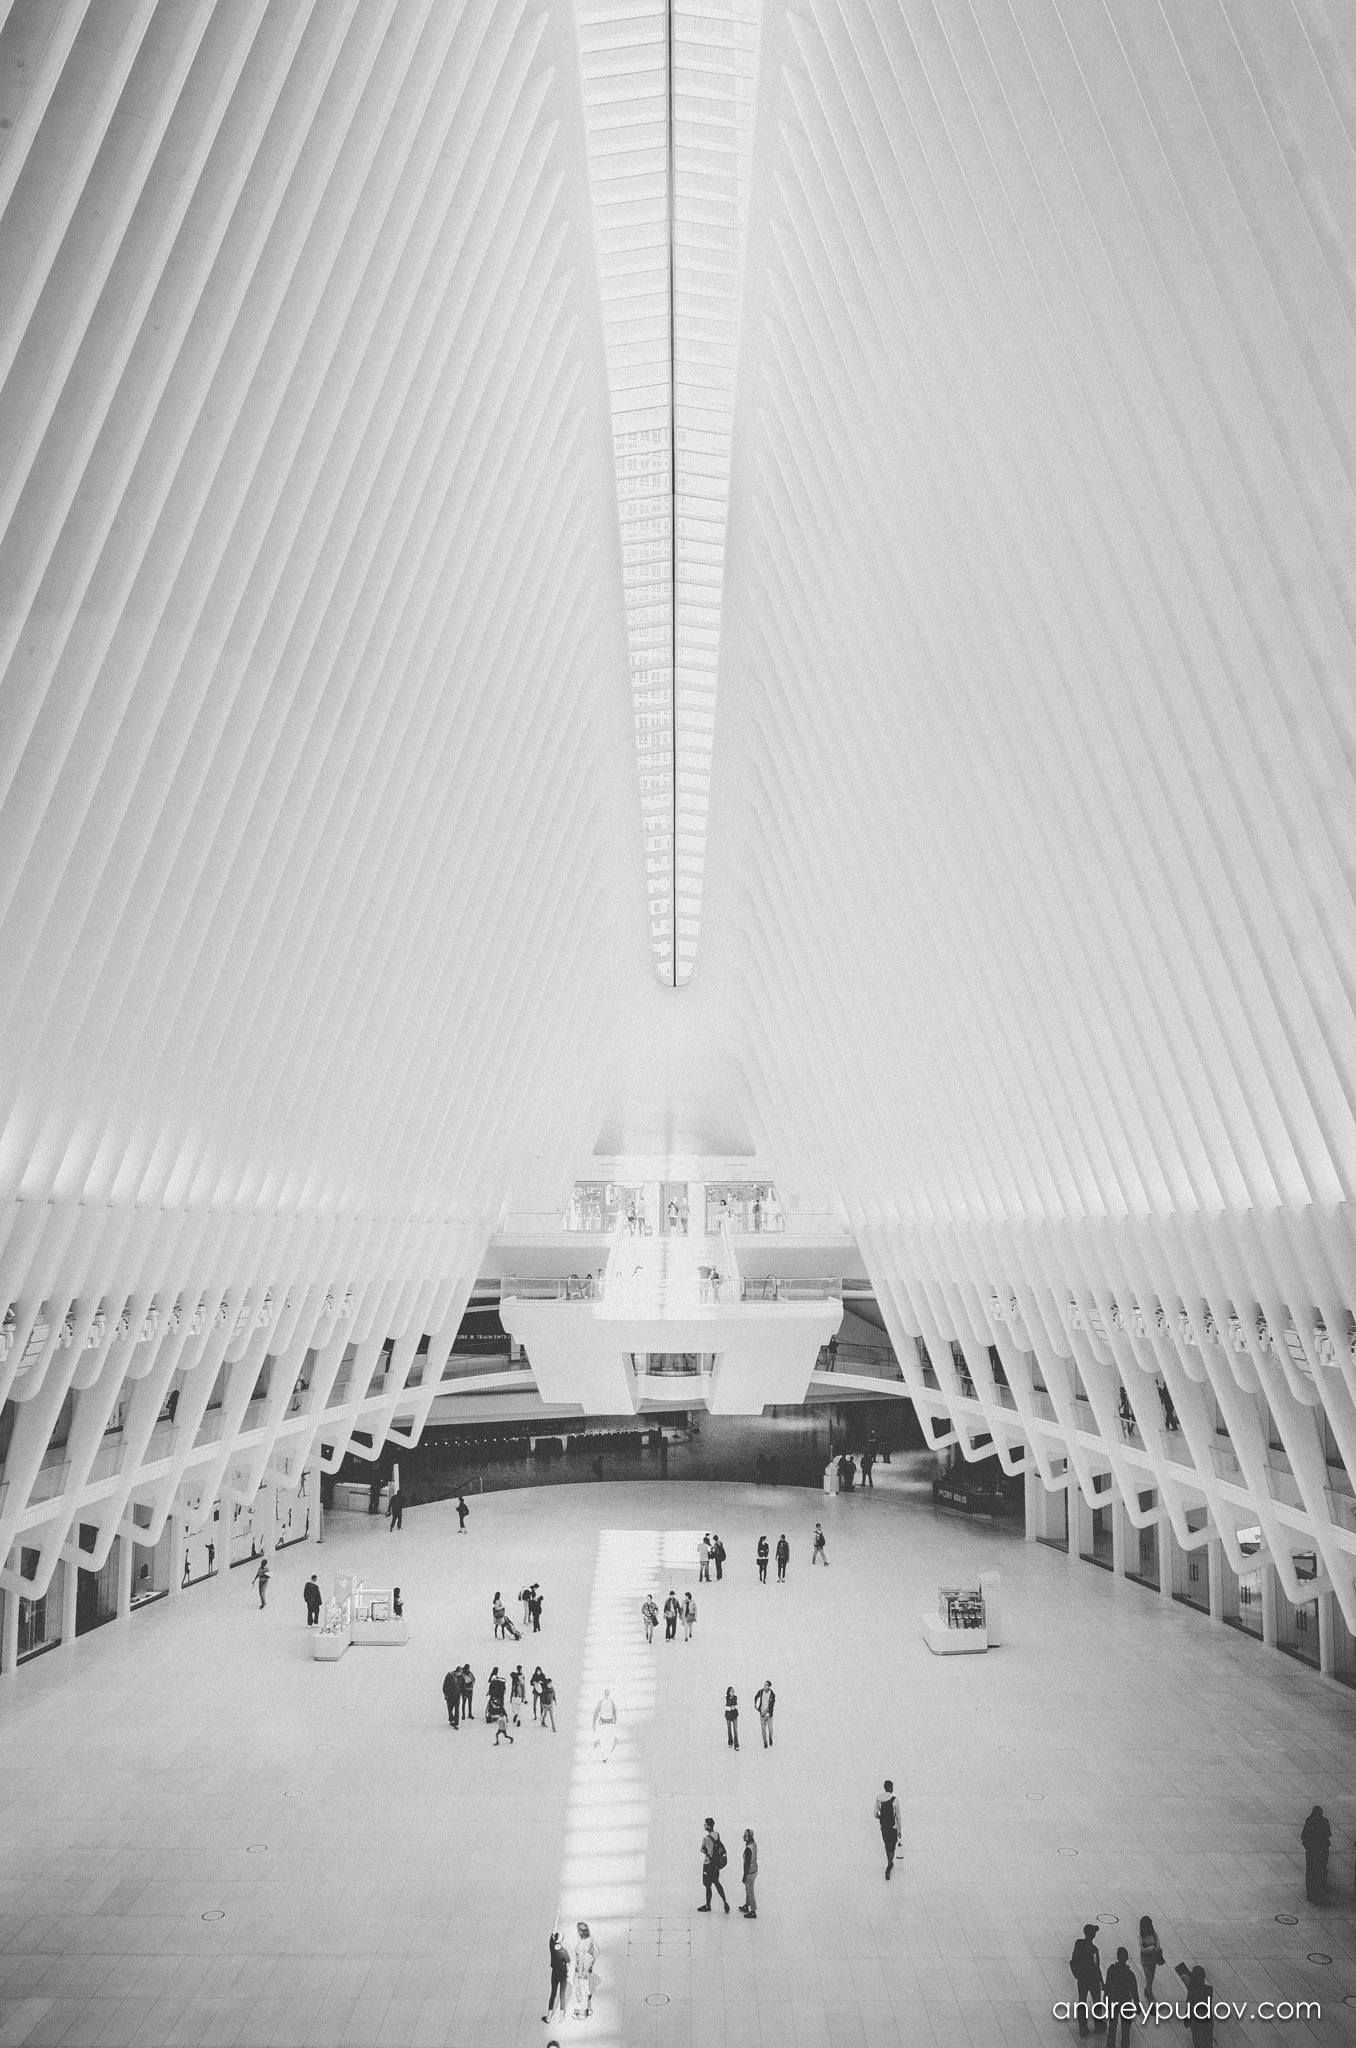 Conquering America 2.0 - Oculus / World Trade Center Station

One of the first decisions that Calatrava had in mind at the time of conceiving the project was the realization of the building at street level, an independent structure along the Wedge of Light Square, by Daniel Libeskind. “Oculus”, the centerpiece of the Transportation Center that presents the new station to the world is a kind of pause in the middle of the dense glass and steel towers that surround it.

The construction, due to constant delays, lasted 12 years and was finally inaugurated on March 3, 2016, without too many celebrations. The cost of its construction, $ 4 billion, greatly exceeded its original cost, becoming, until the time of its inauguration, the most expensive train station in the world and the third largest transportation center in New York, after Grand Central and Penn Station, both in Midtown Manhattan.